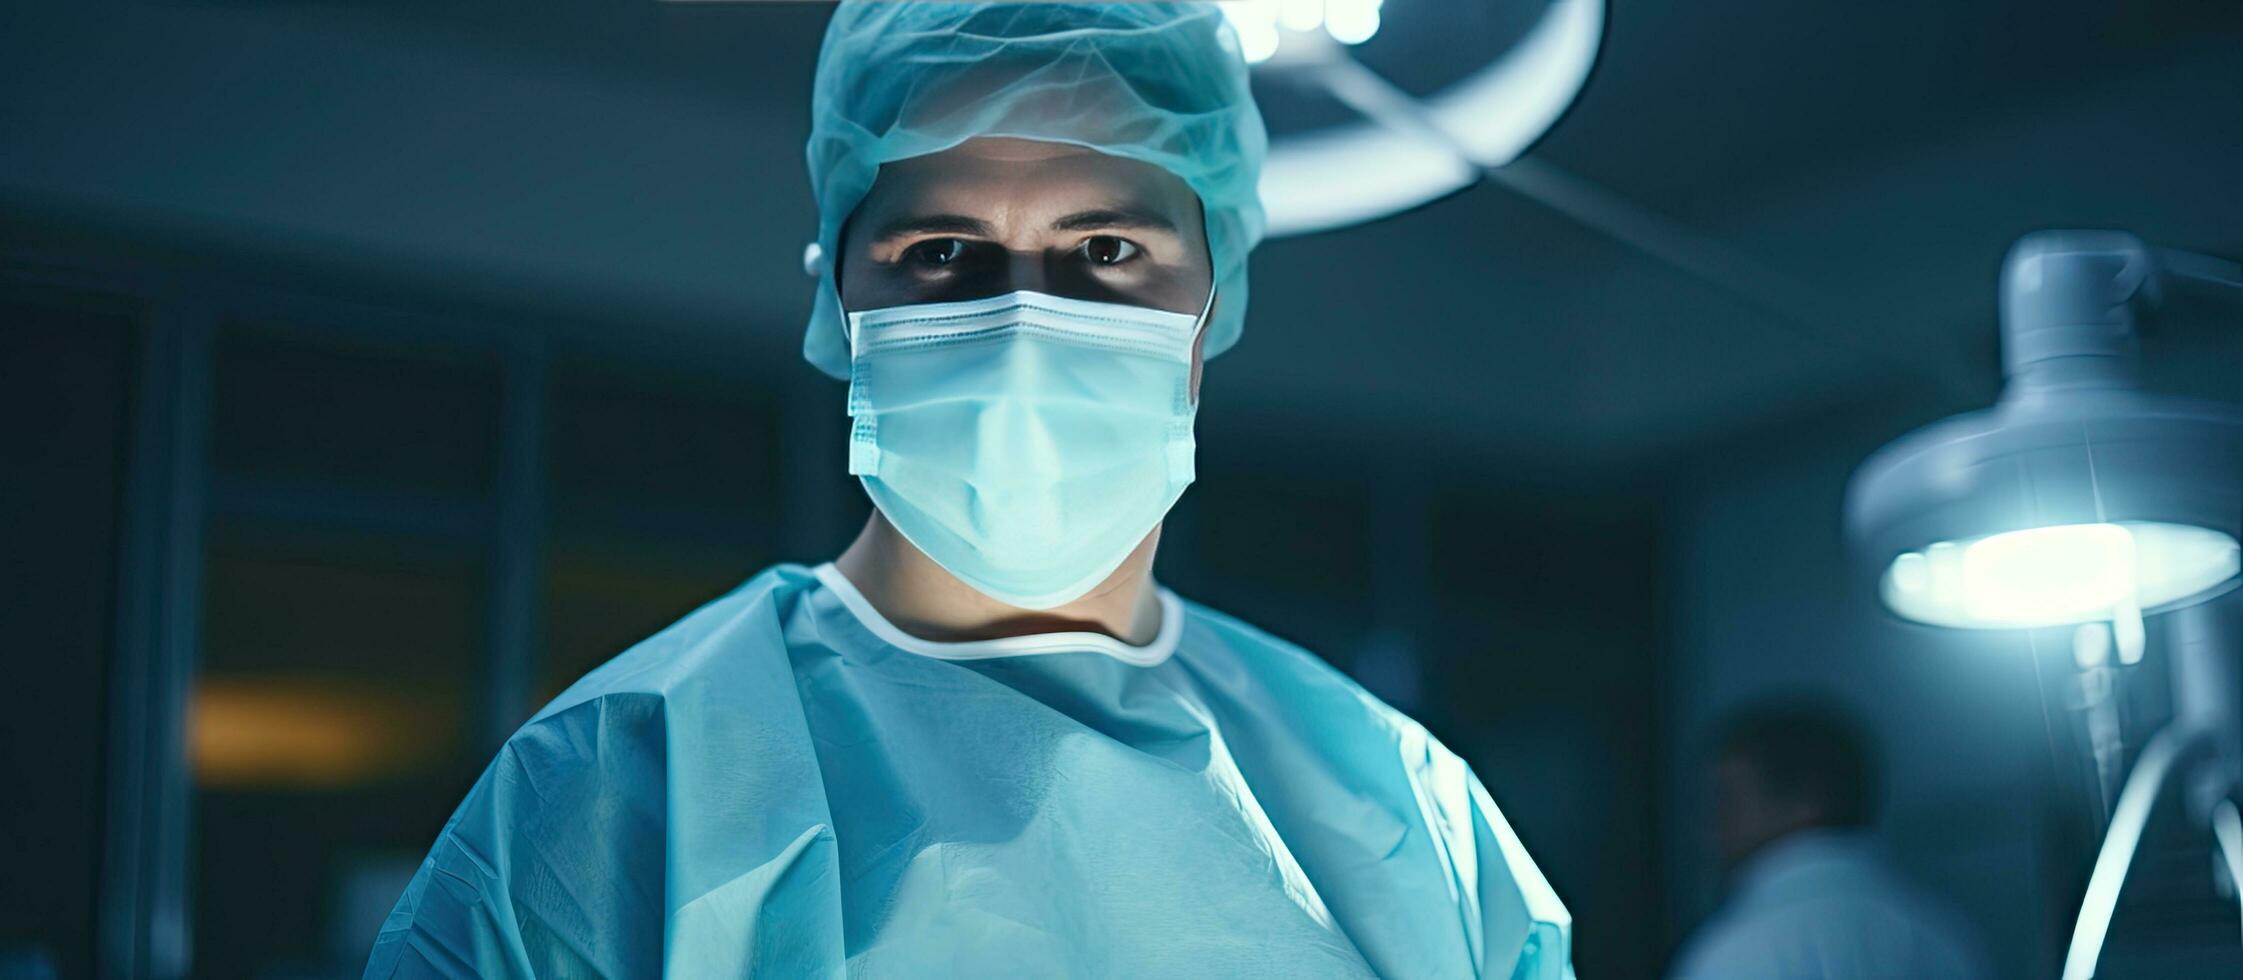 Surgeon operating in the OR with cancer treatment focus modern medicine empty space photo